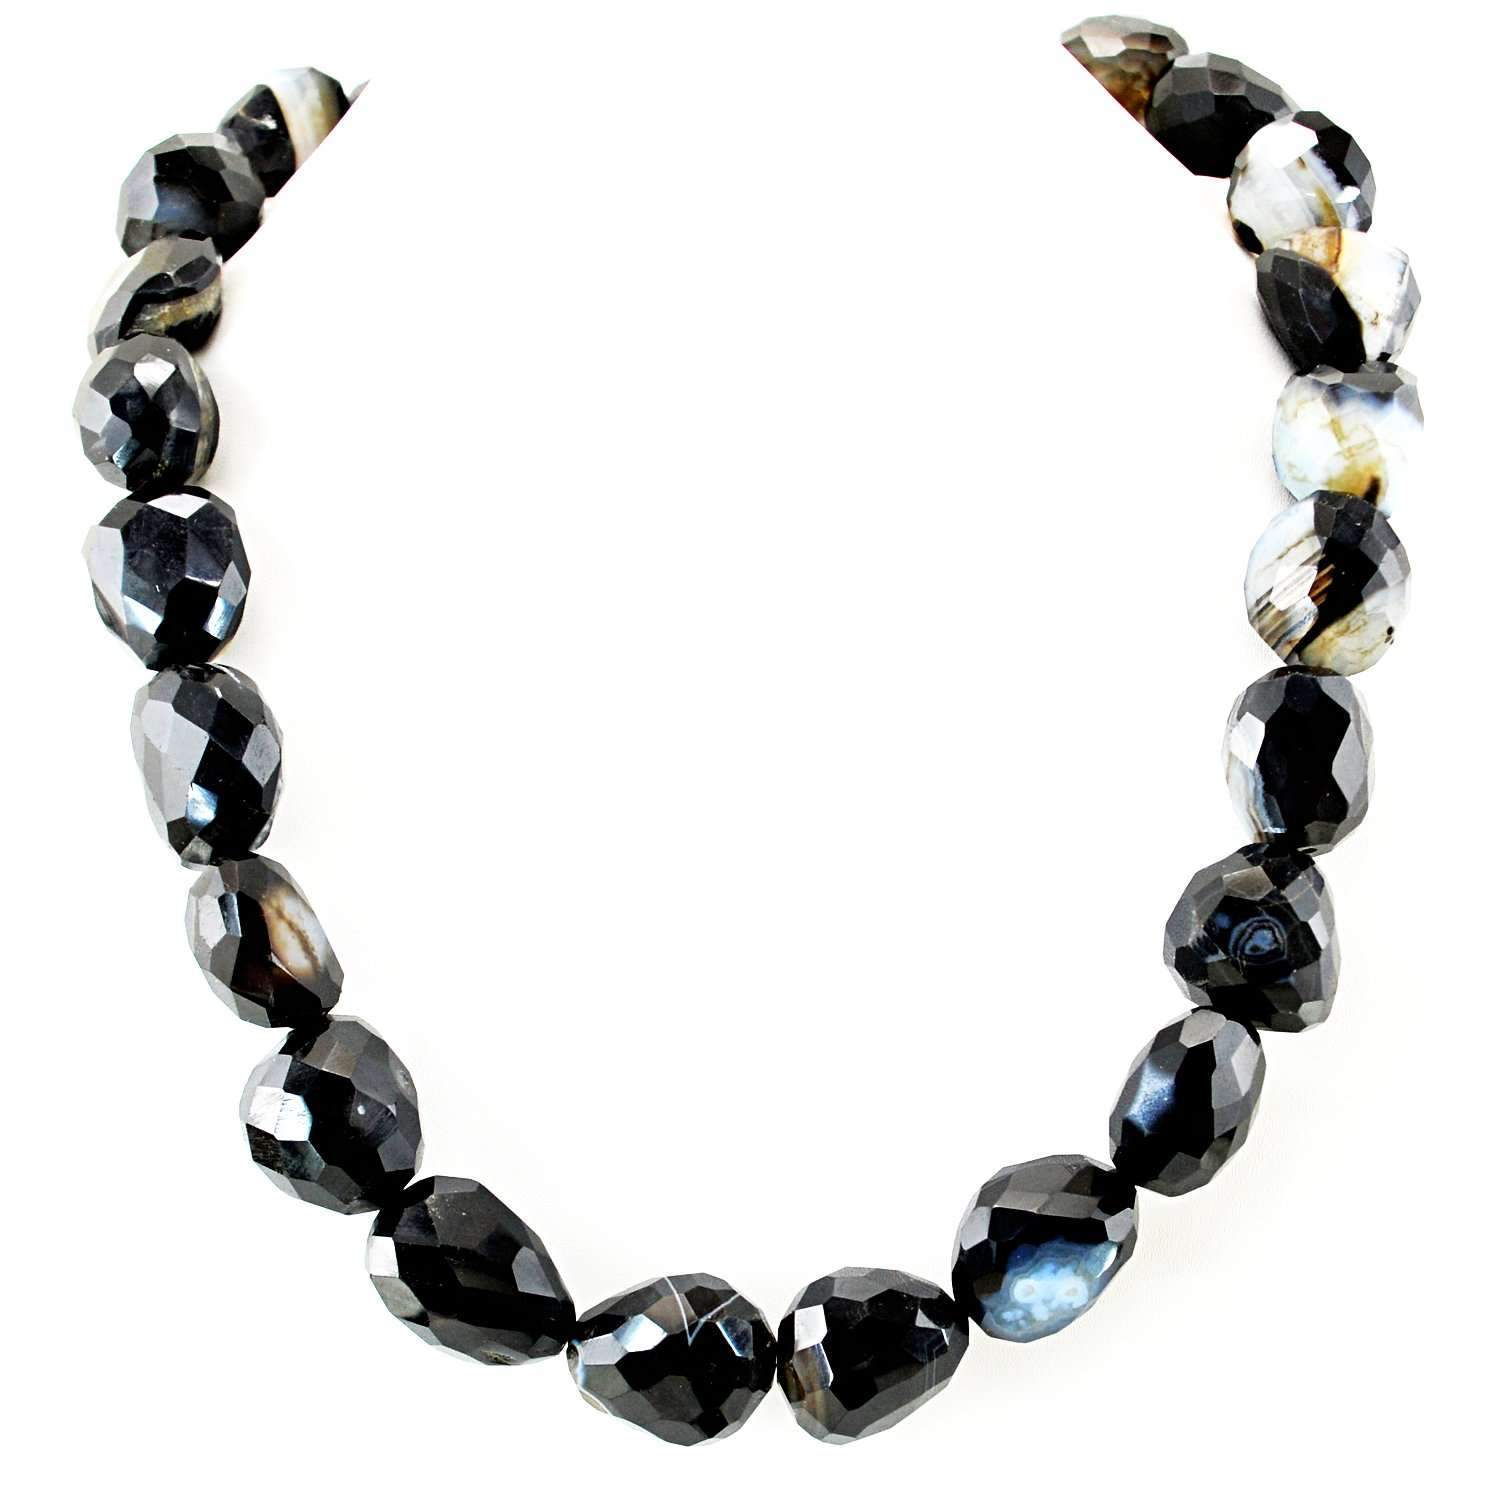 gemsmore:Natural Black Onyx Necklace Single Strand Untreated Faceted Beads